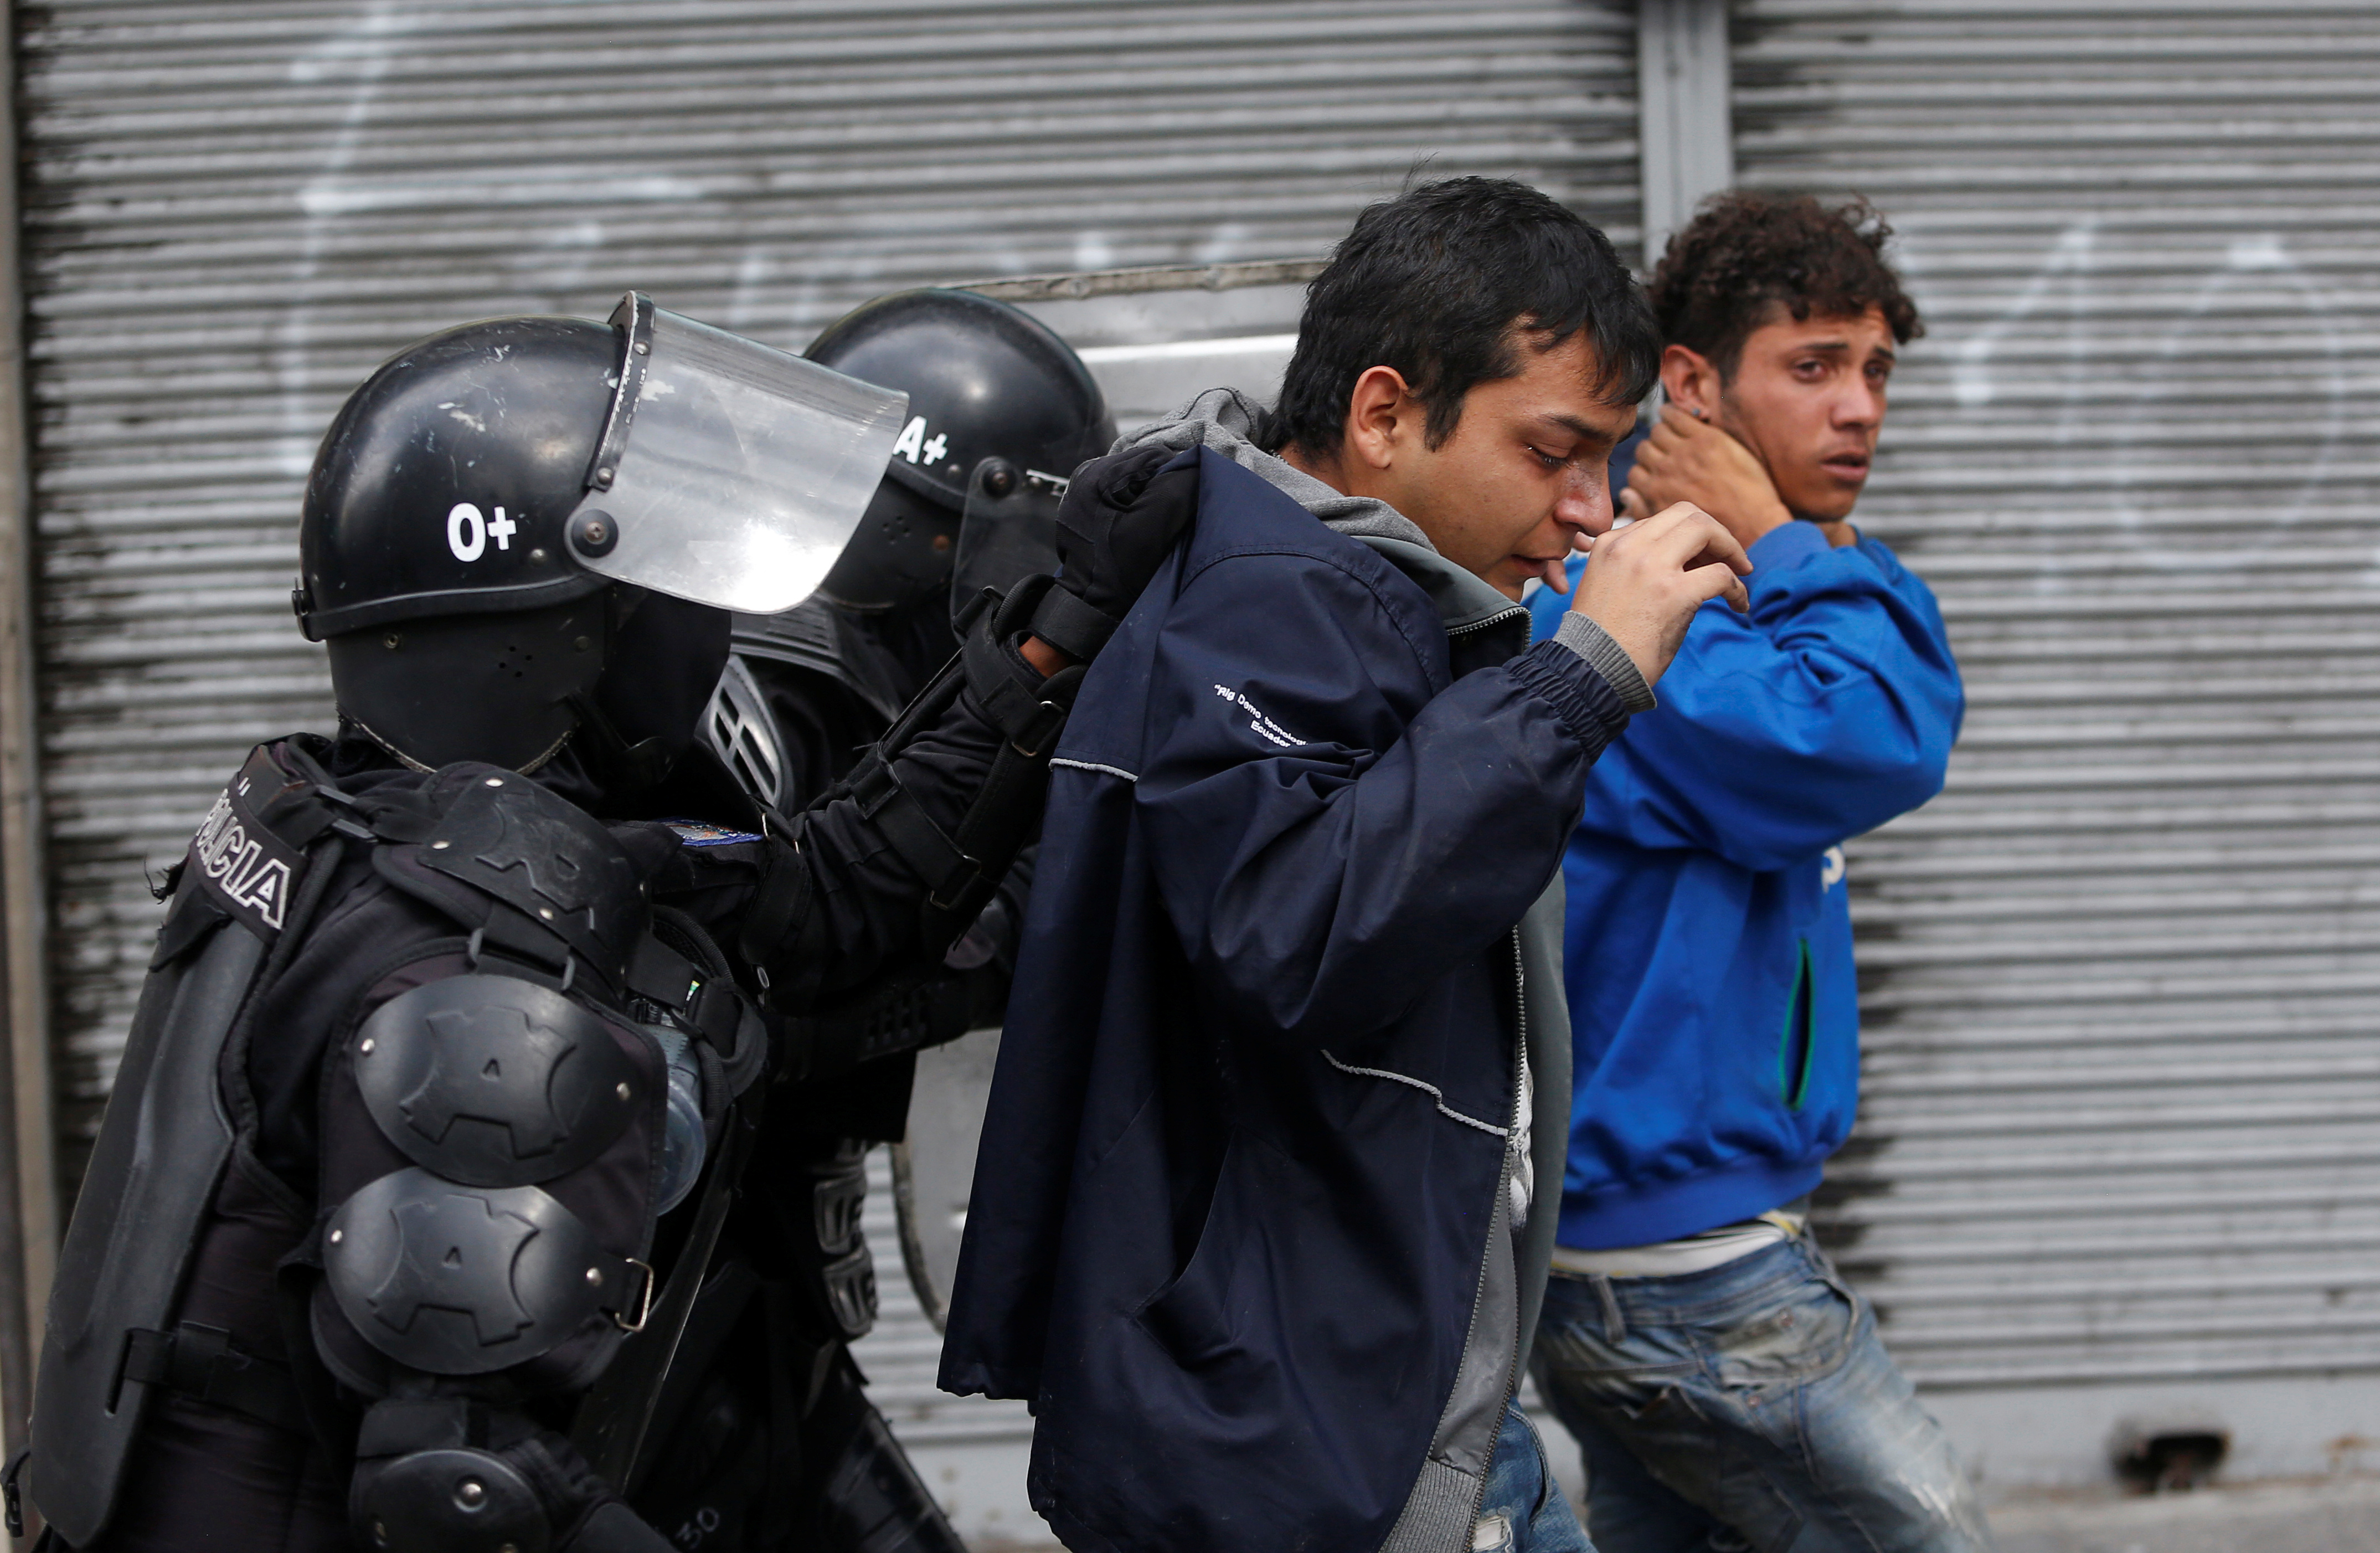 Two people are arrested by police in Ecuador